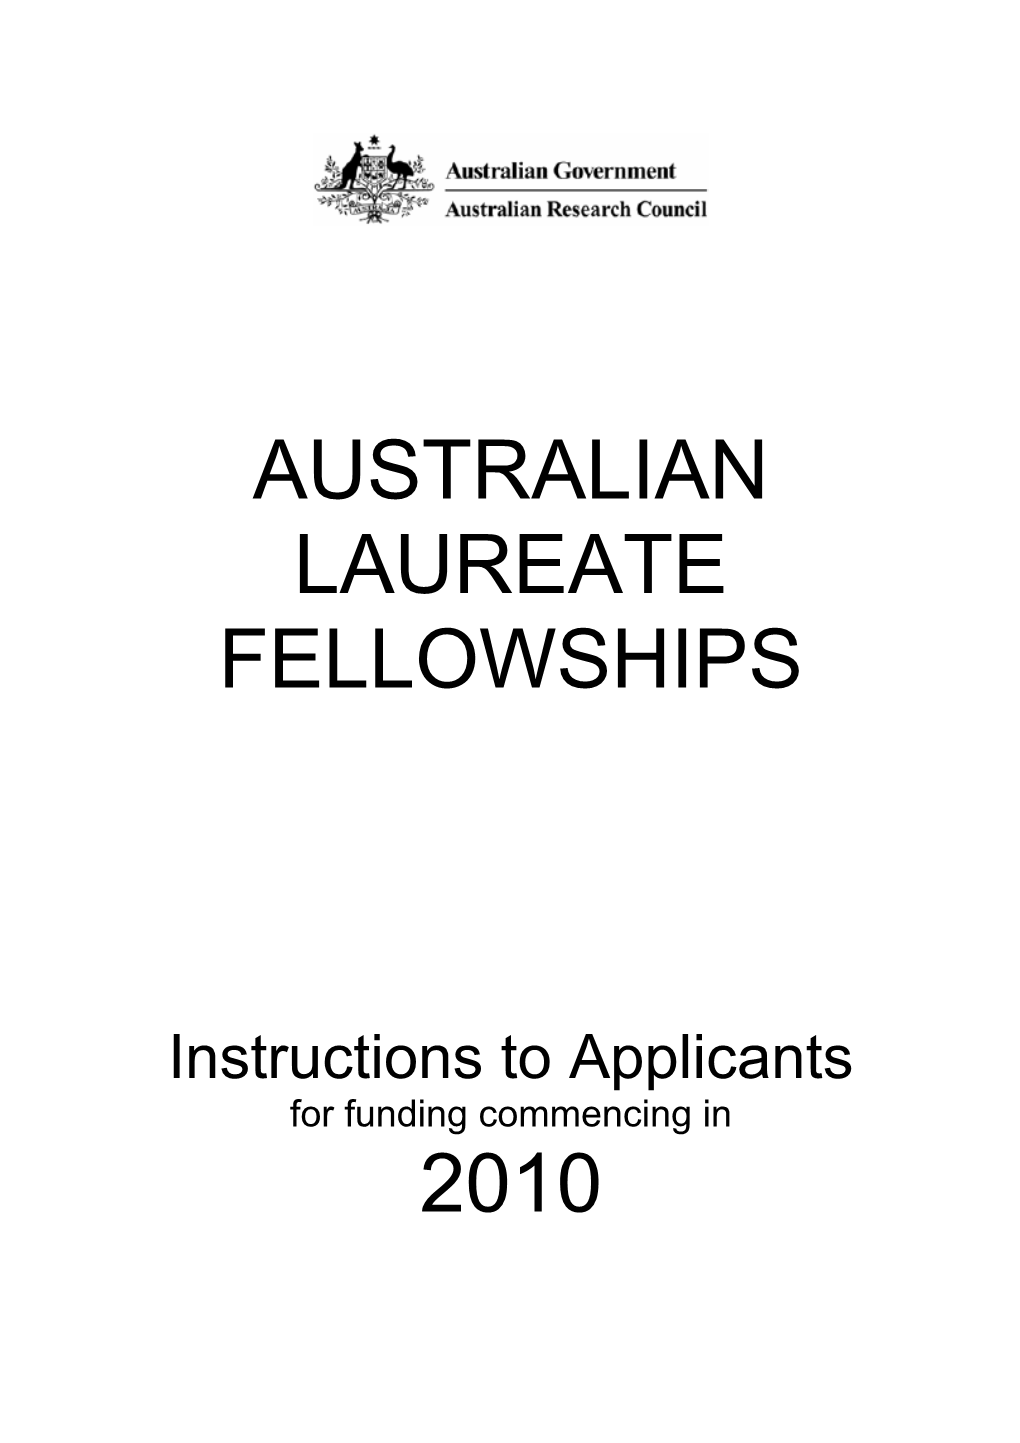 Australian Laureate Fellowships Instructions to Applicants - for Funding Commencing in 2010